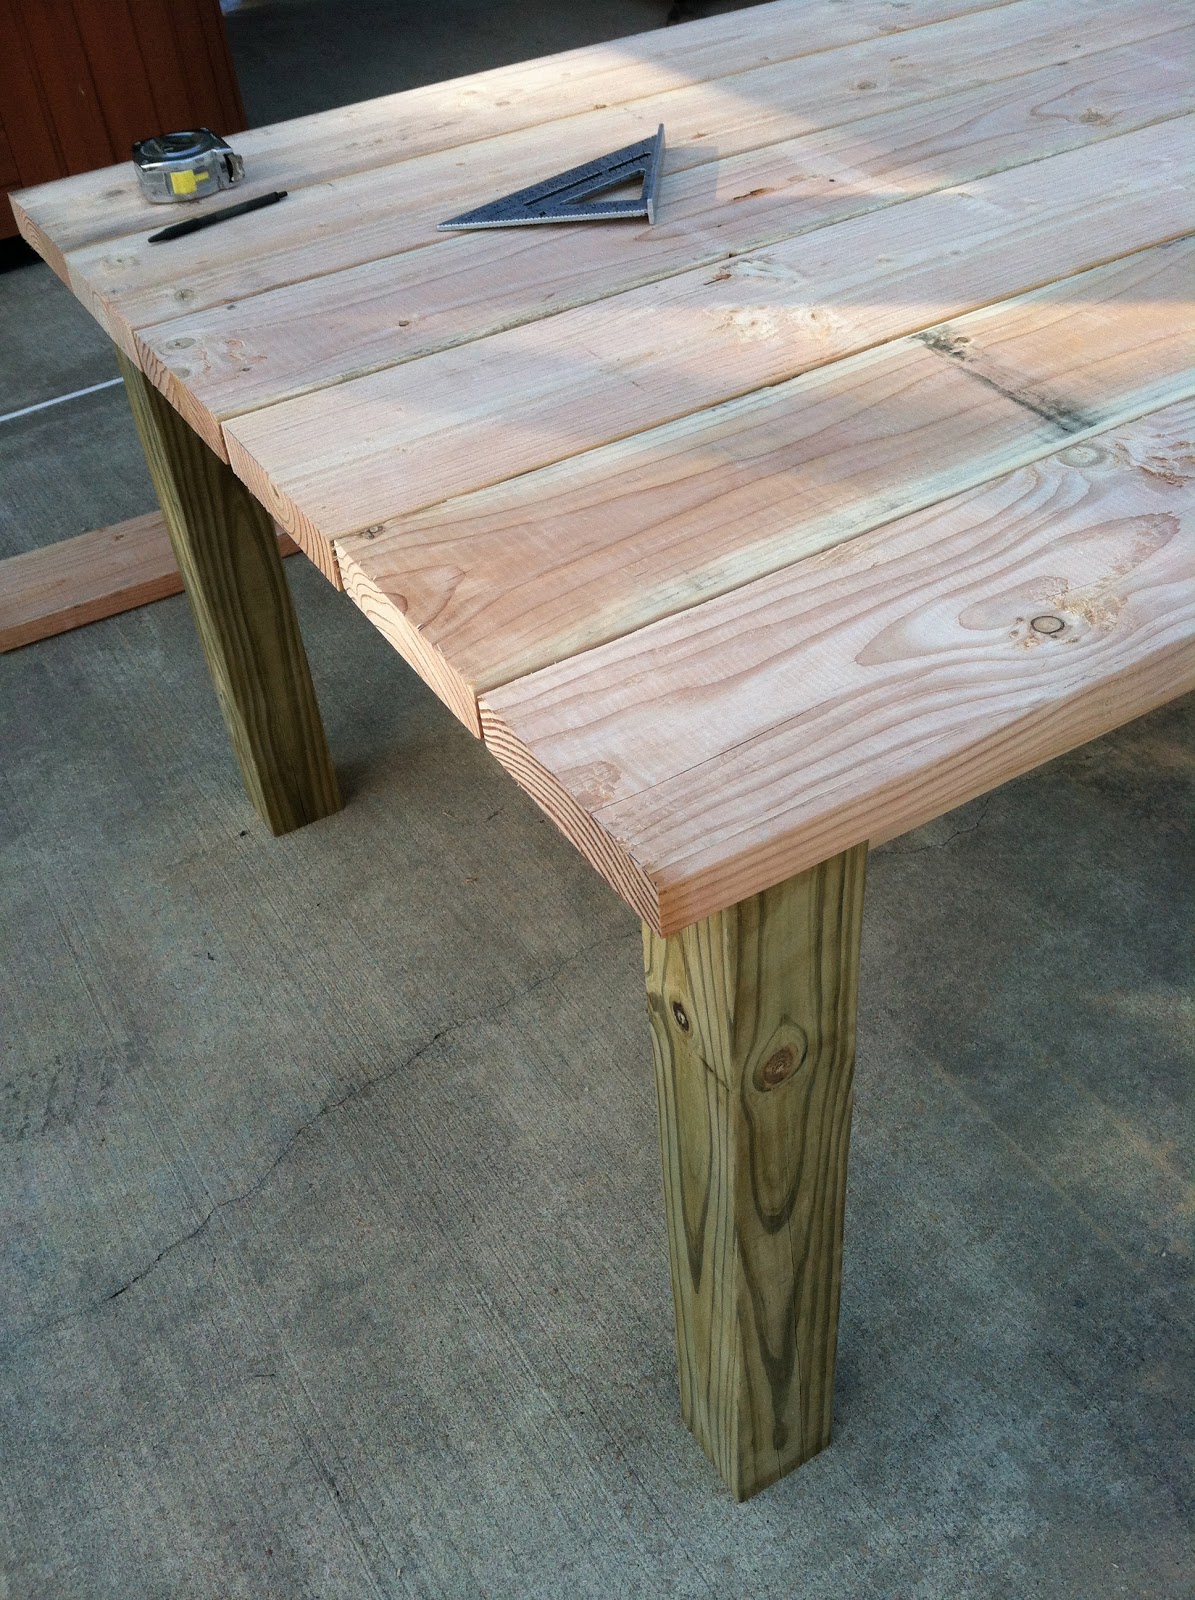 Pine Tree Home: Building My Own Outdoor Wood Farm Table